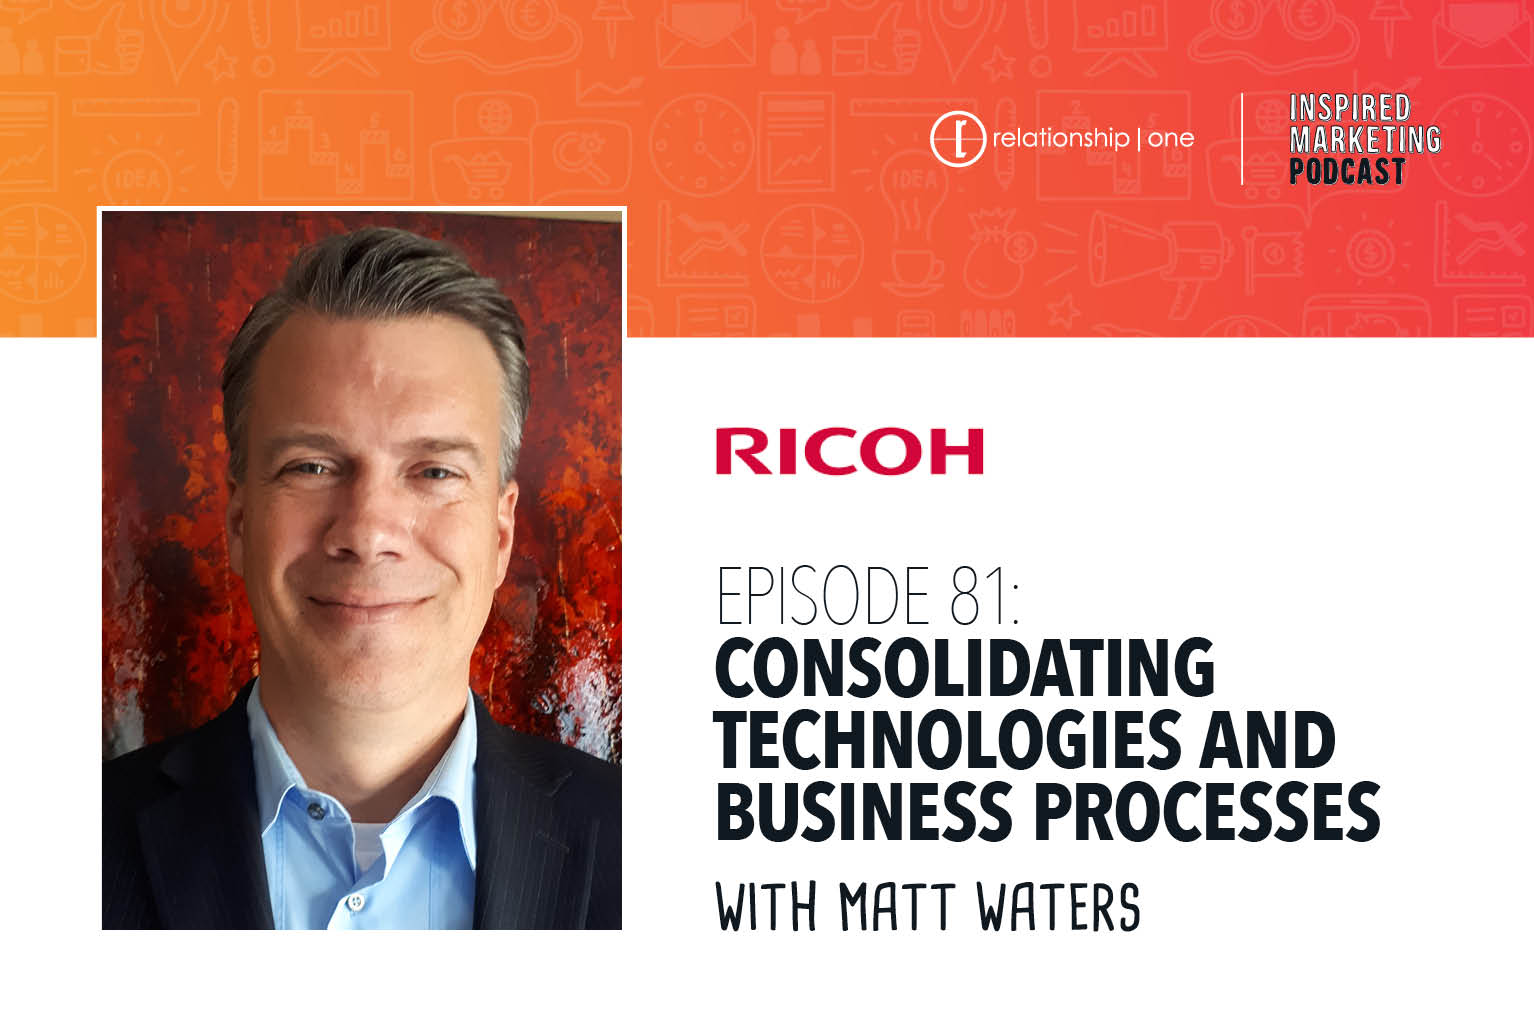 Inspired Marketing: Ricoh’s Matt Waters on Consolidating Technologies and Business Processes